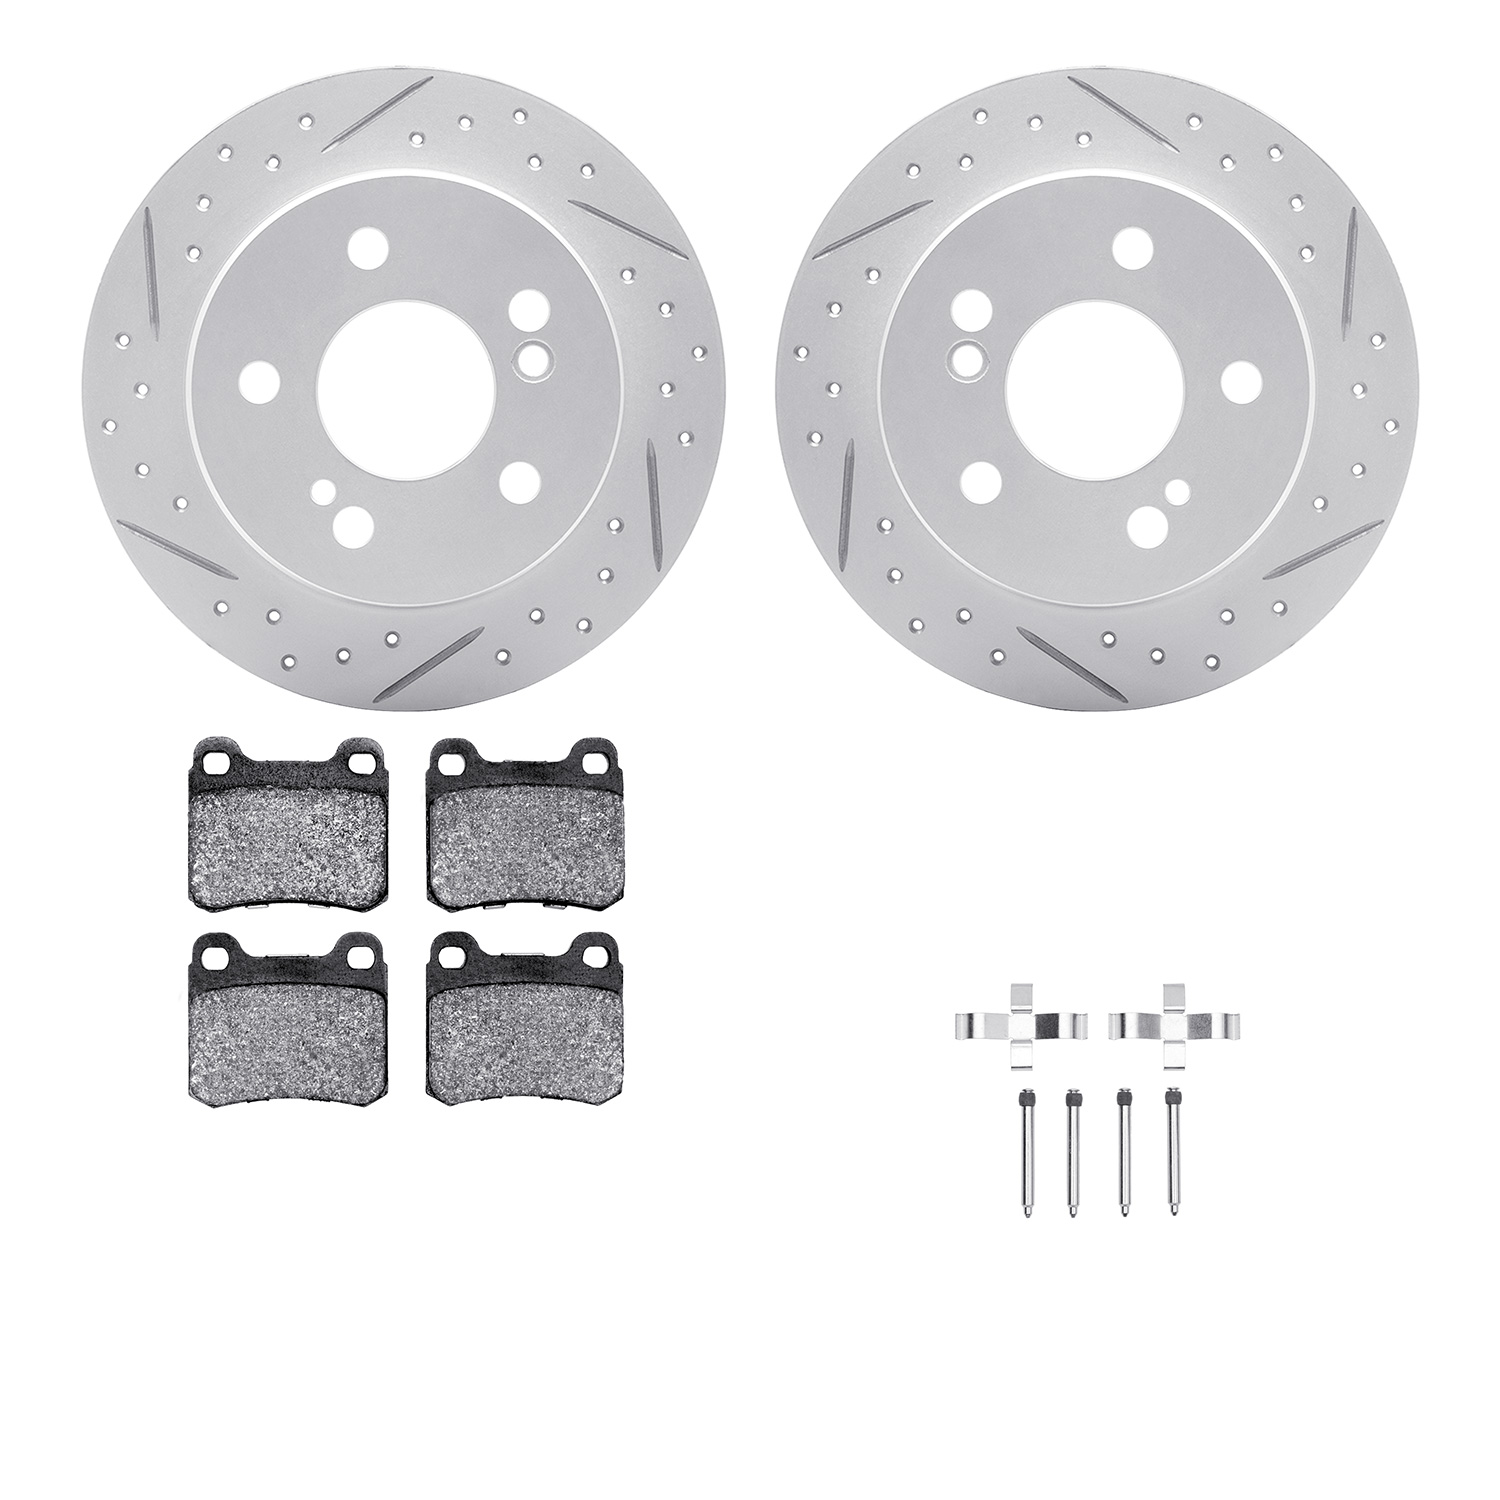 2512-63007 Geoperformance Drilled/Slotted Rotors w/5000 Advanced Brake Pads Kit & Hardware, 1984-1995 Mercedes-Benz, Position: R